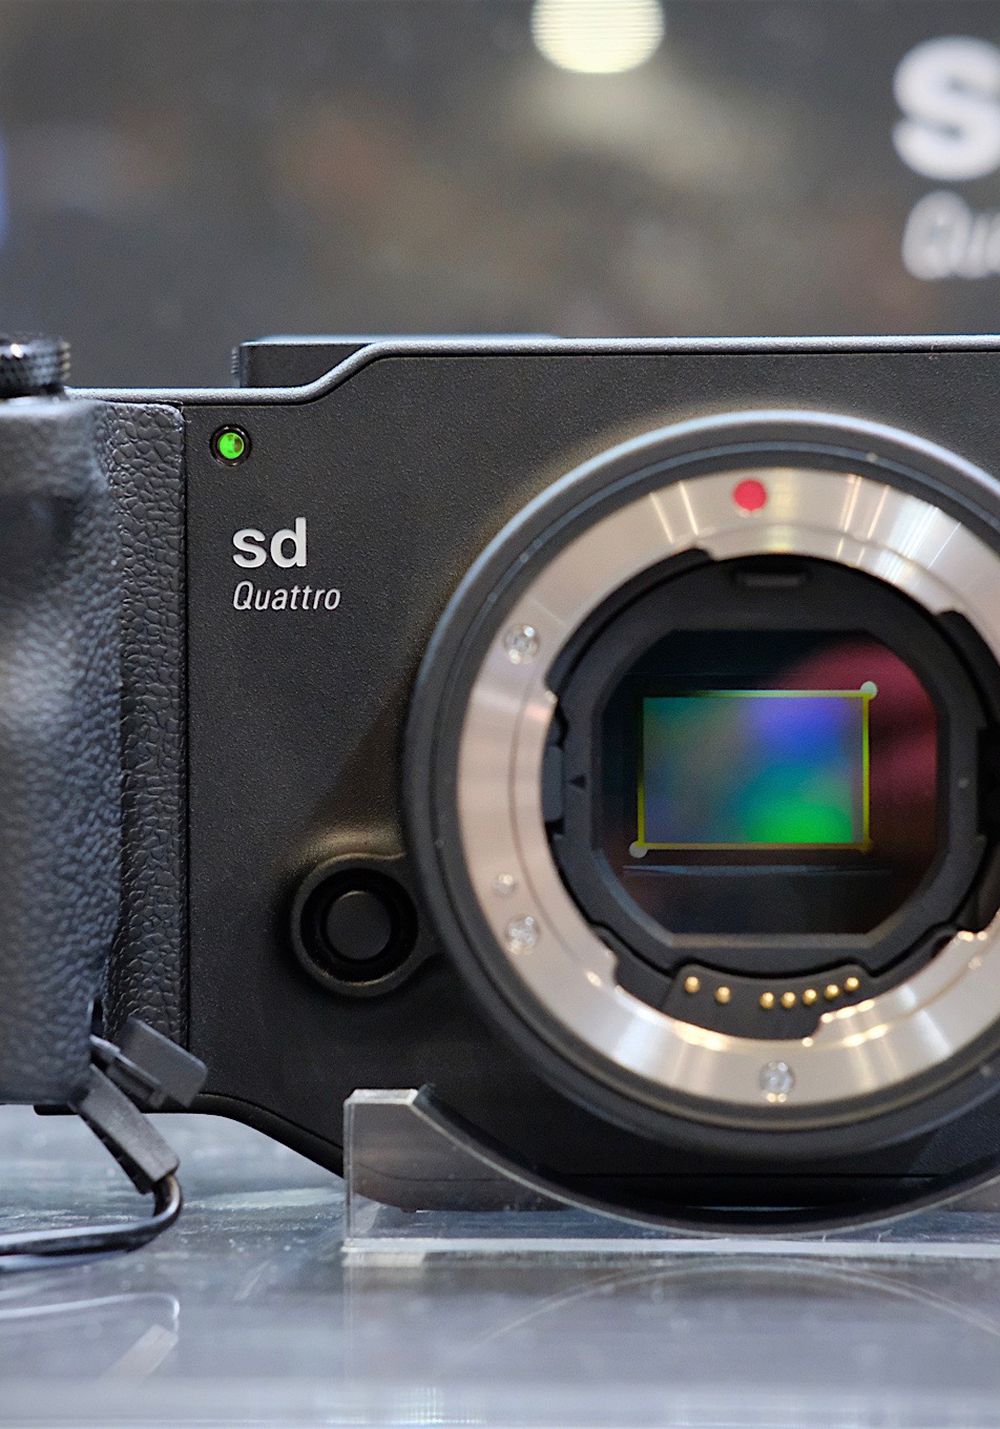 The new Sigma Quattro is the oddest camera since the last Sigma